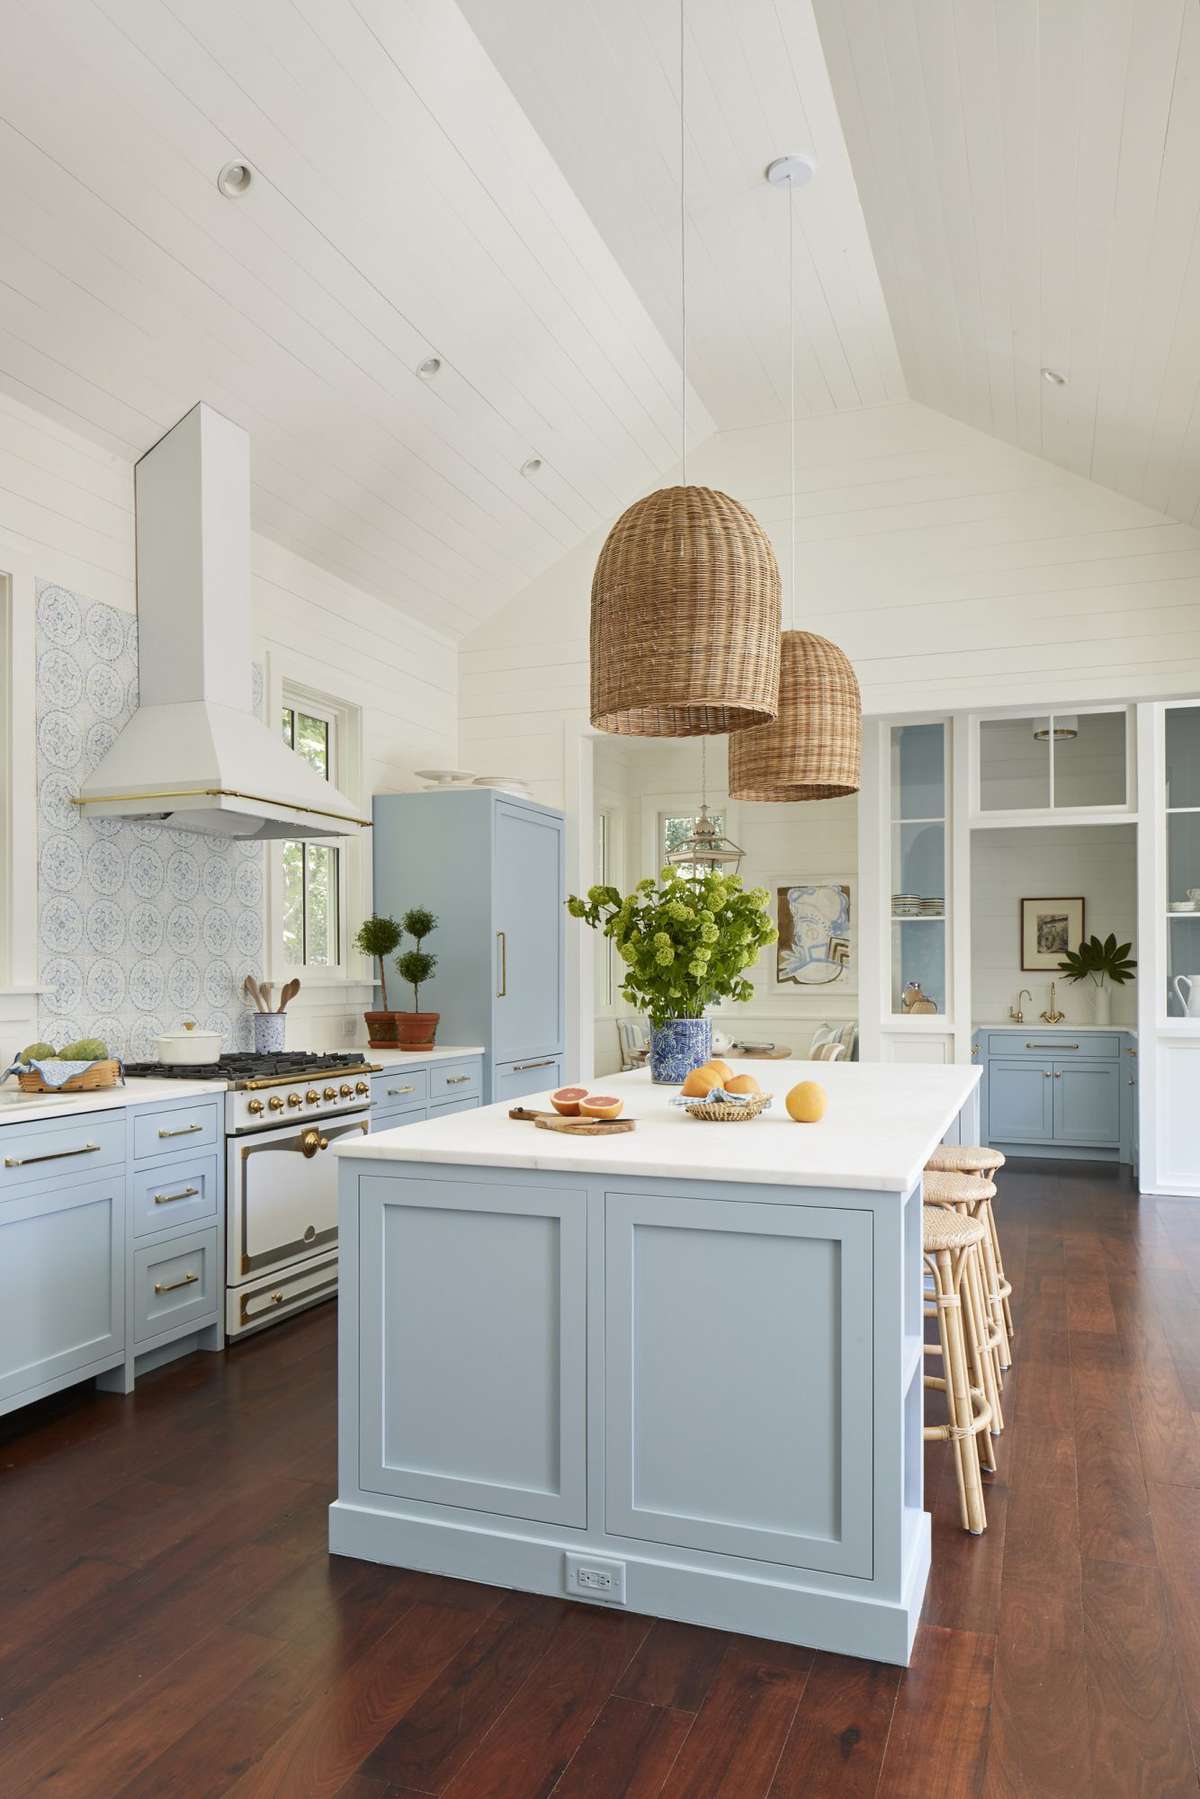 18 Beautiful Kitchens to Plan Your Dream Space   Southern Living